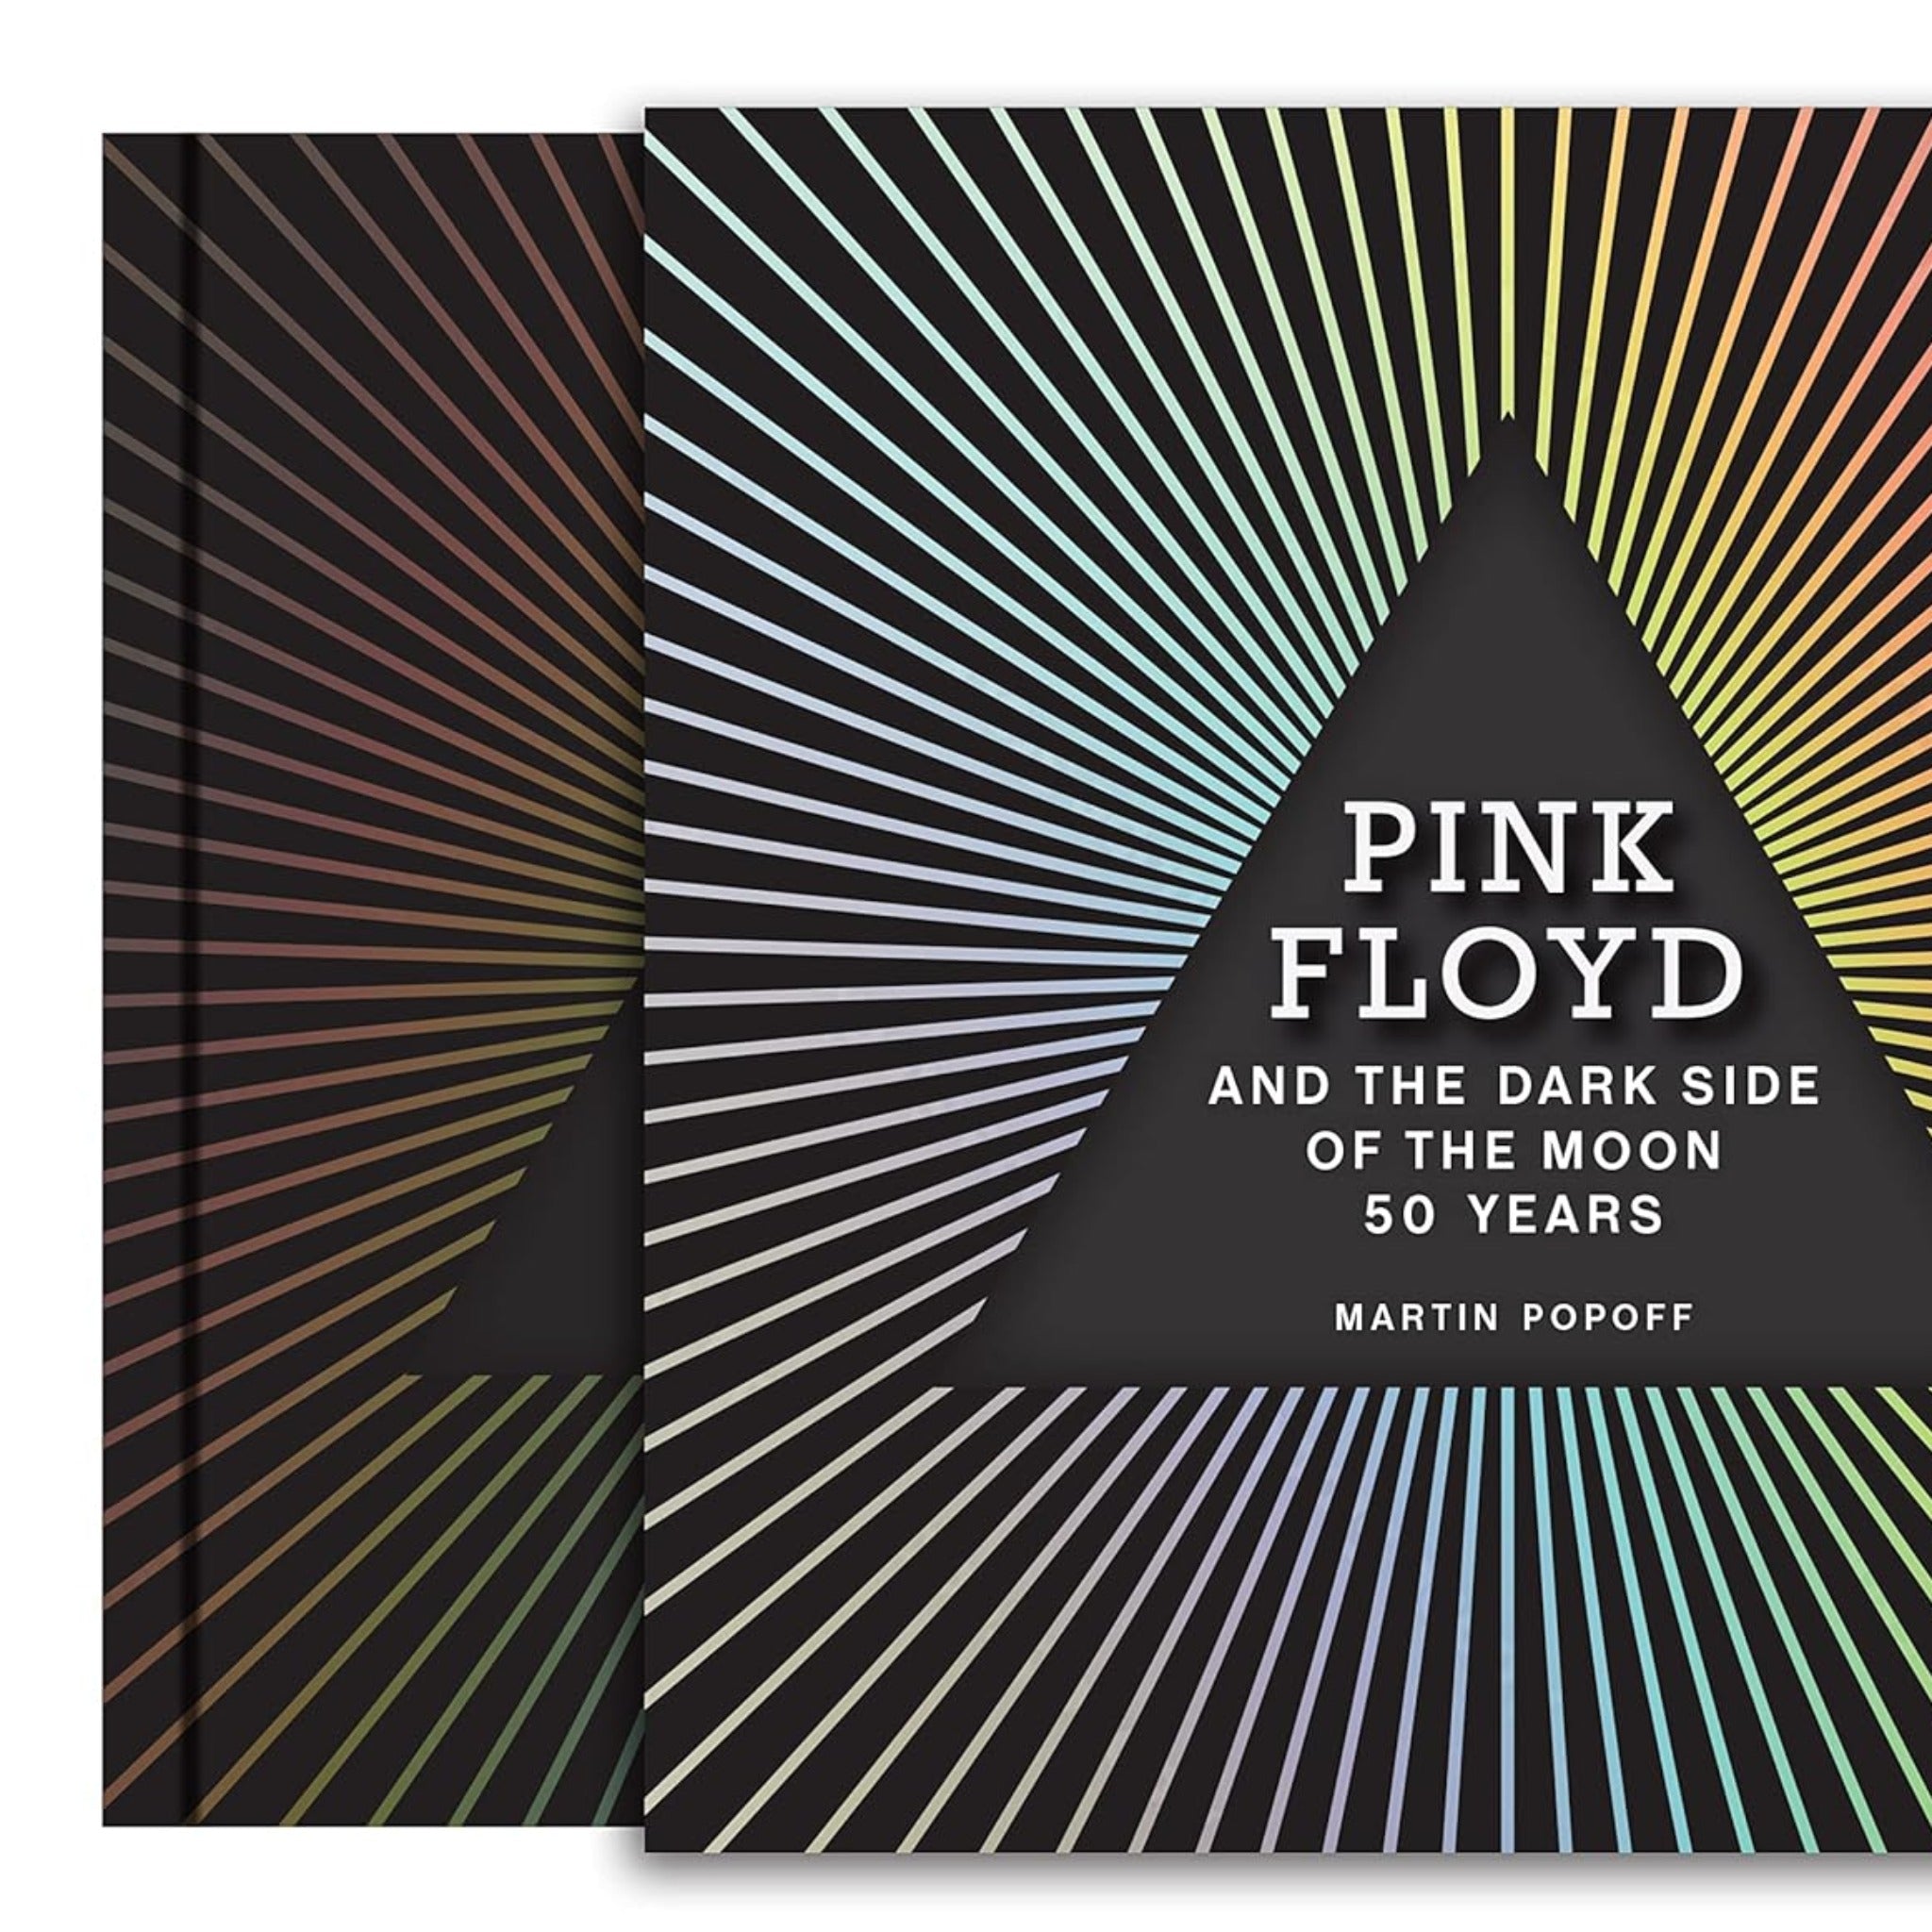 LIBRO PINK FLOYD THE DARK SIDE OF THE MOON 50TH ANNIVERSARY